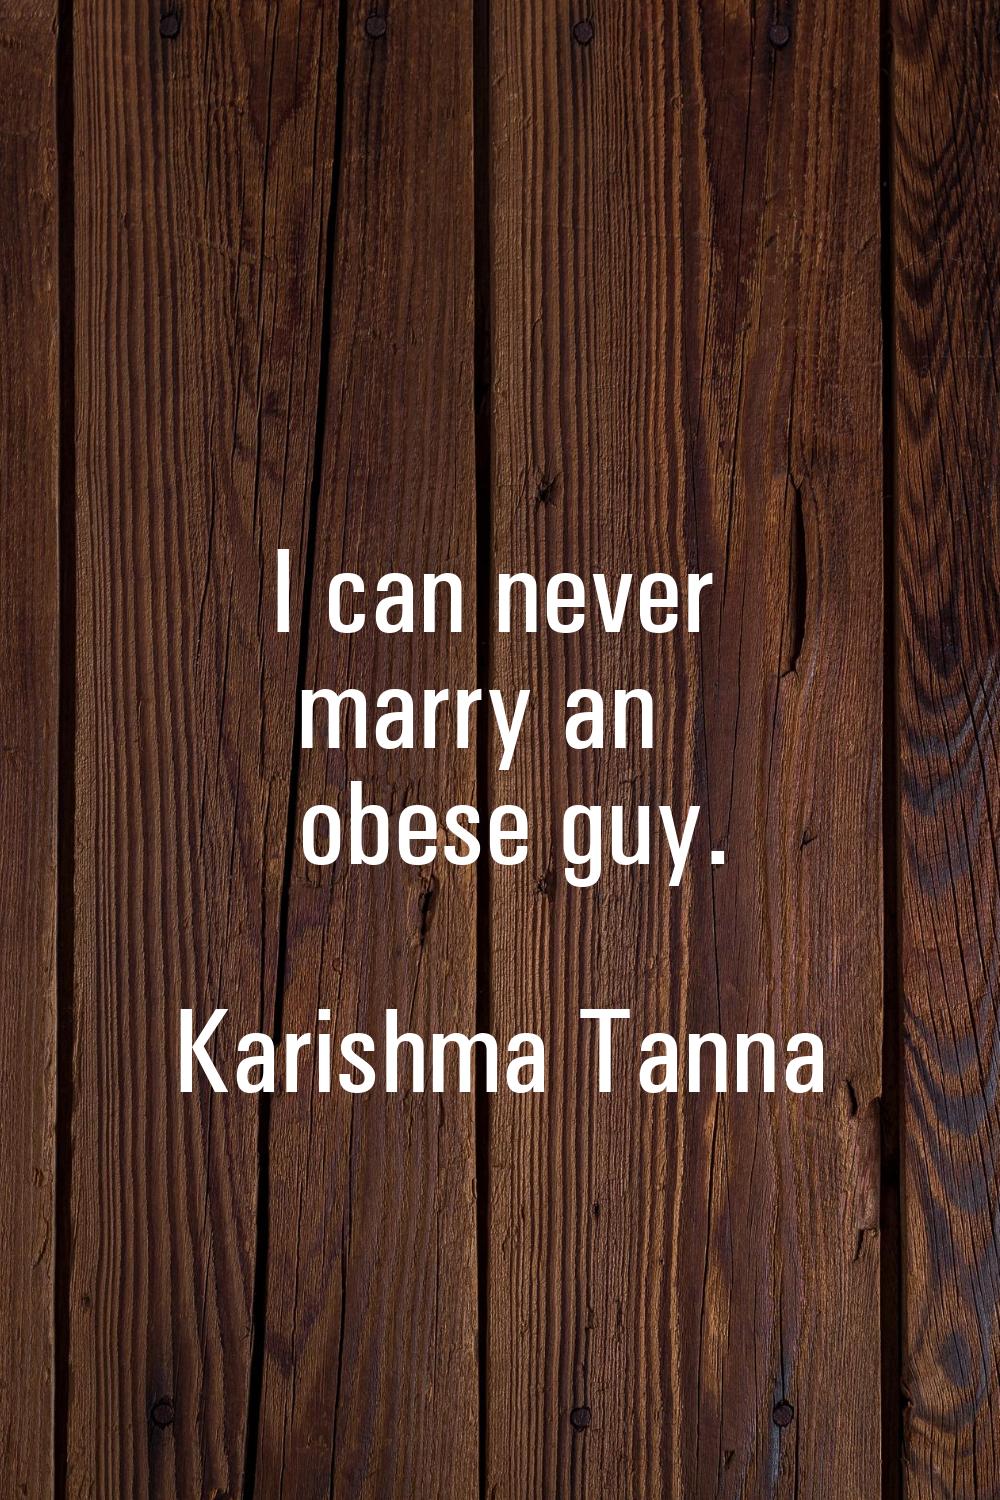 I can never marry an obese guy.